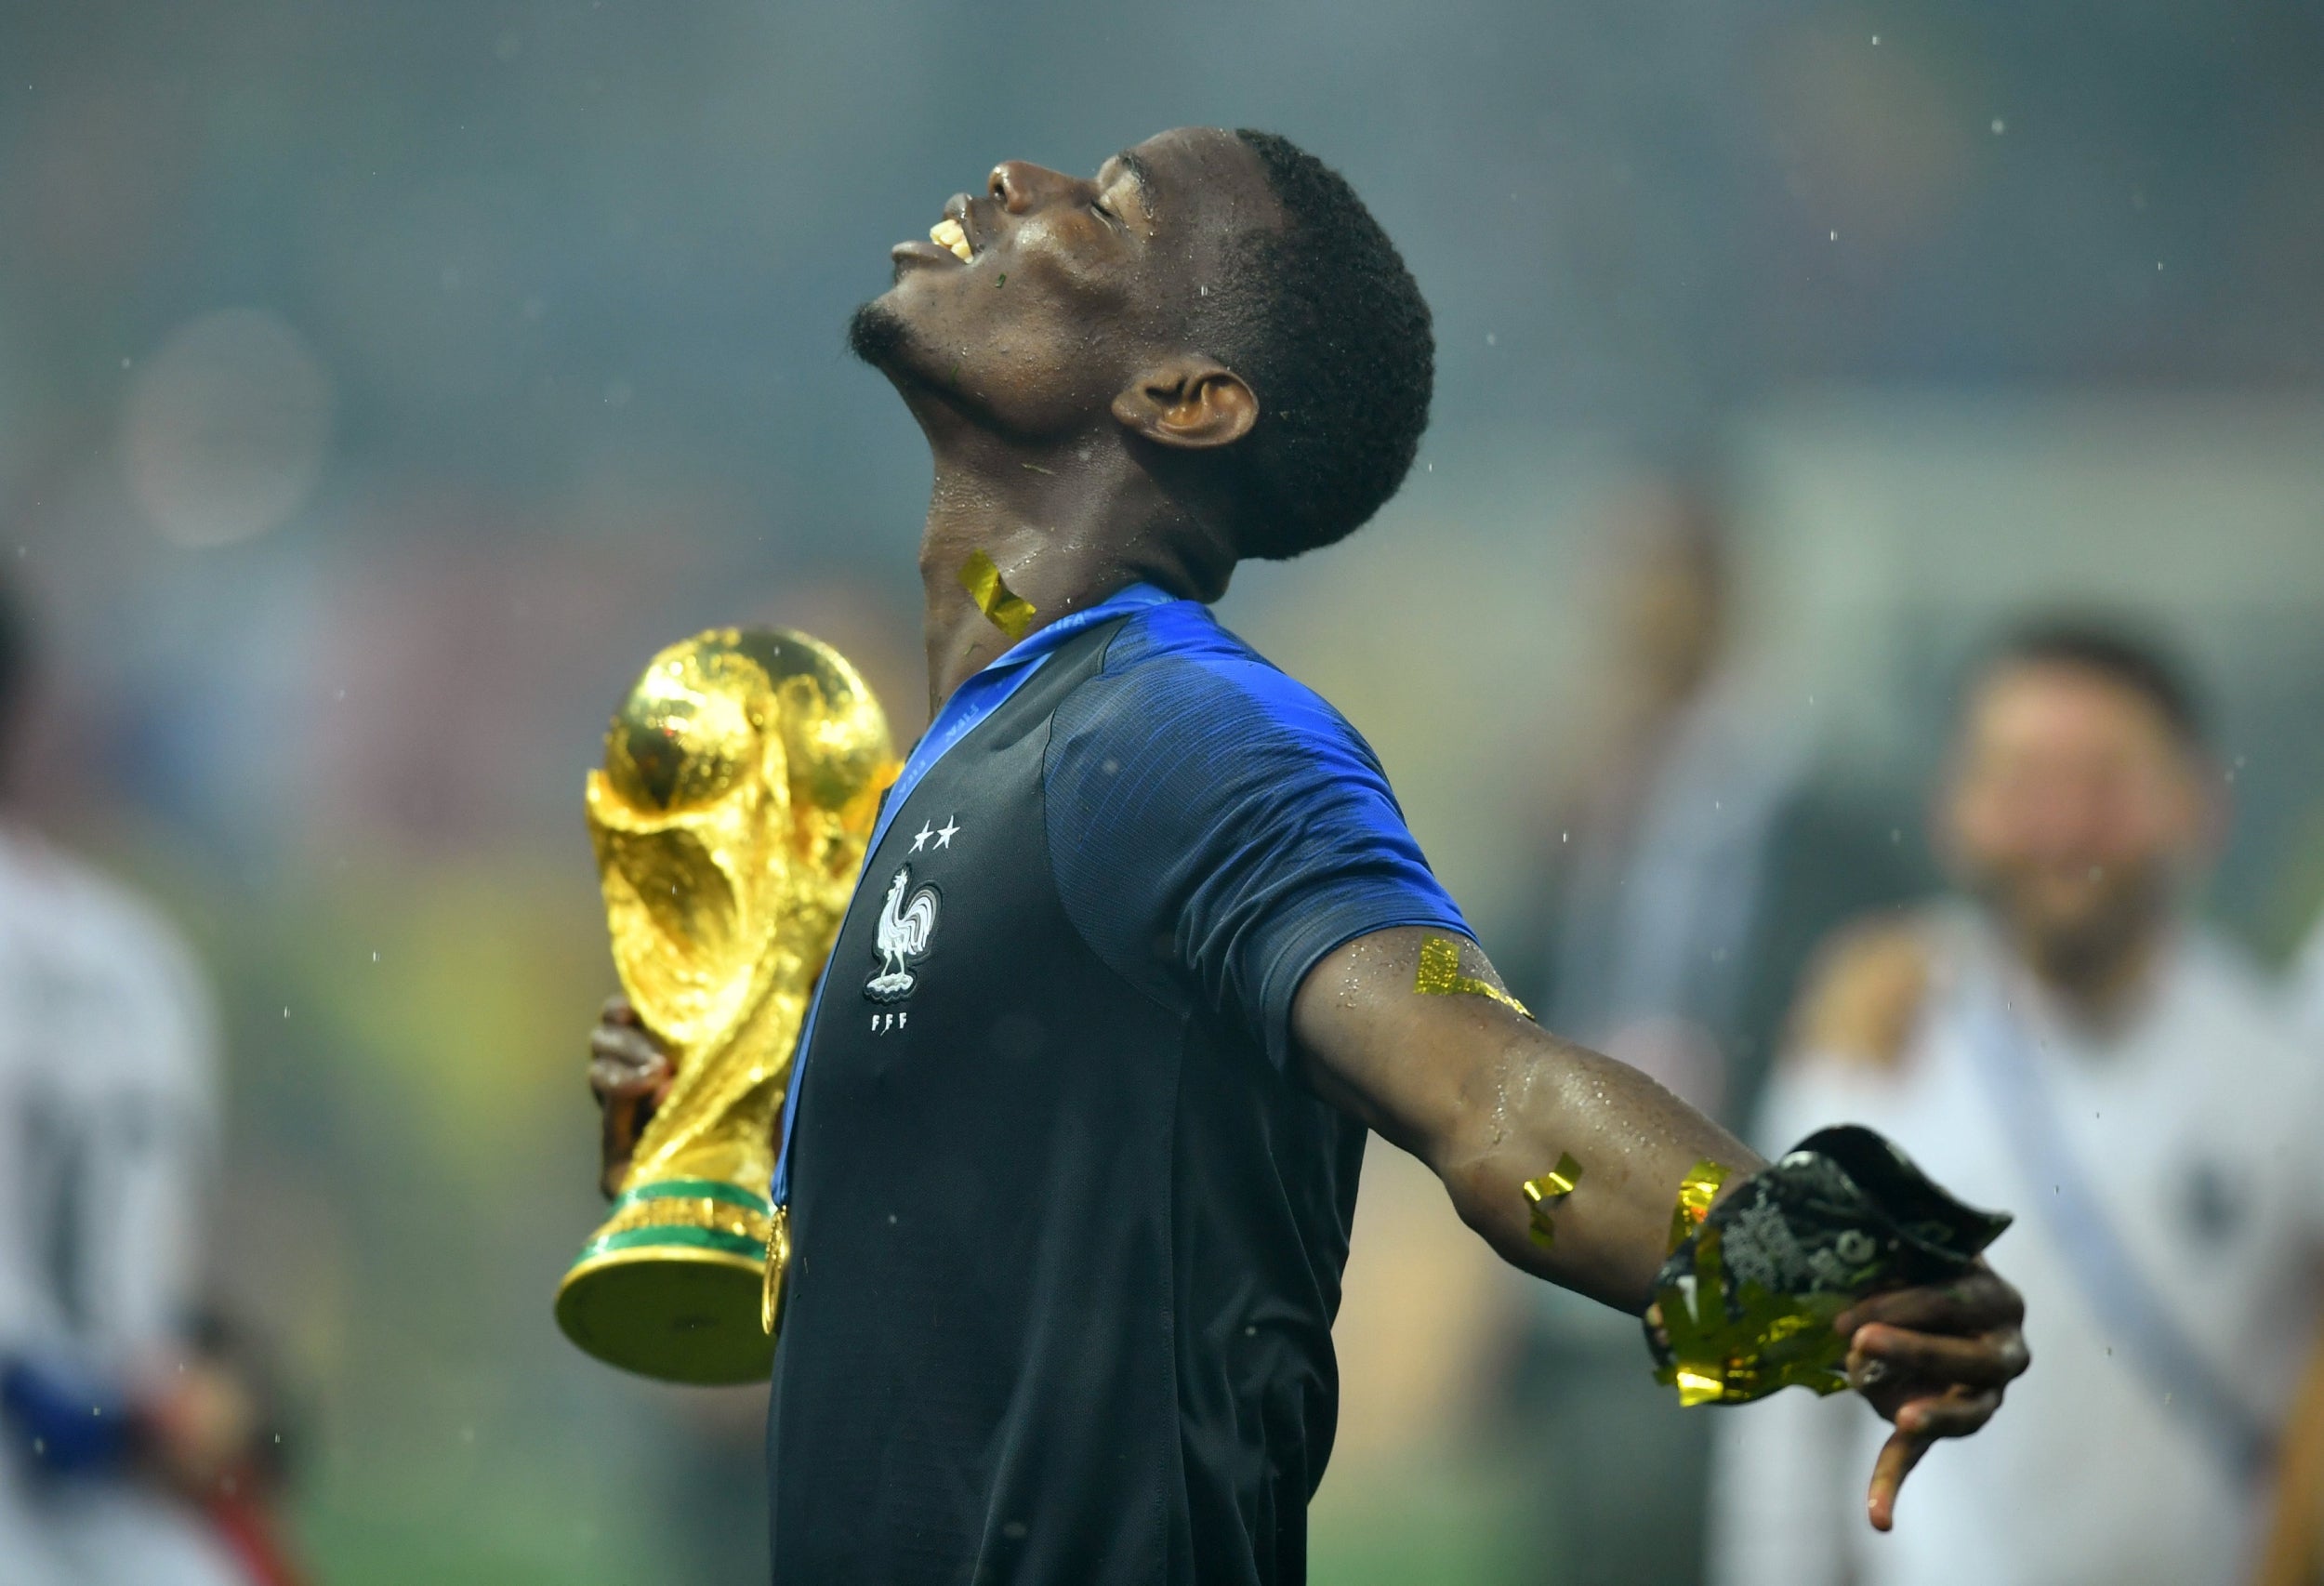 Pogba reached football's Everest last summer, winning the World Cup